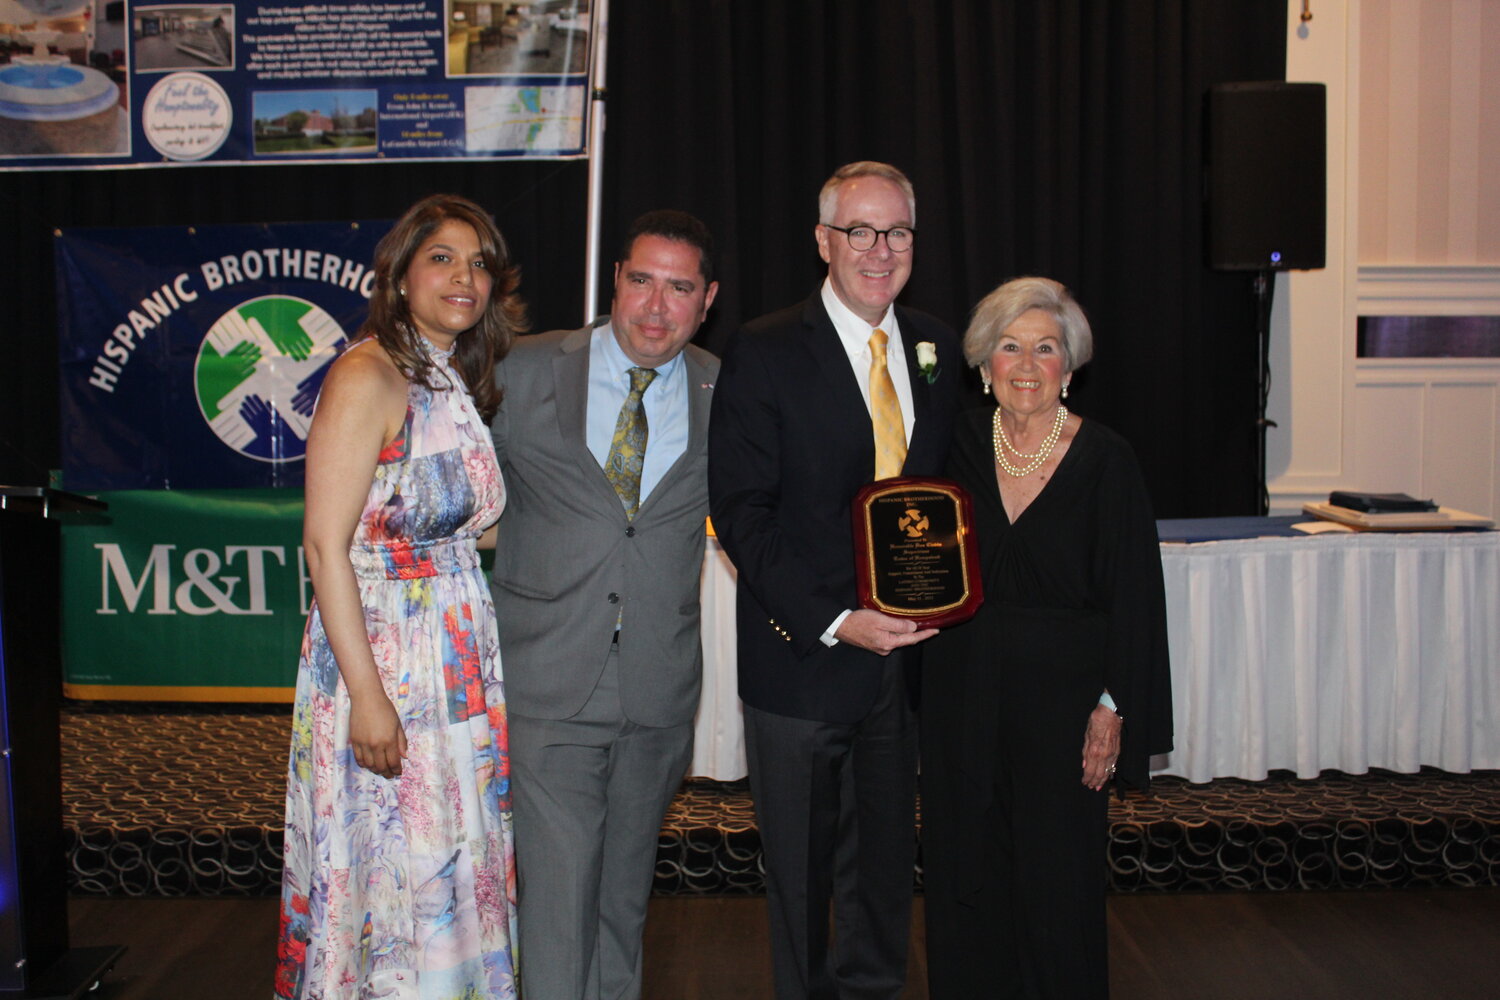 Hispanic Brotherhood president Vanessa Wagner with Vice President Alex Cepero; one of the awardees, Town of Hempstead Supervisor Don Clavin; and Brotherhood executive director Margarita Grasing. Clavin and Grasing worked closely together during the pandemic to get food and supplies to town residents.